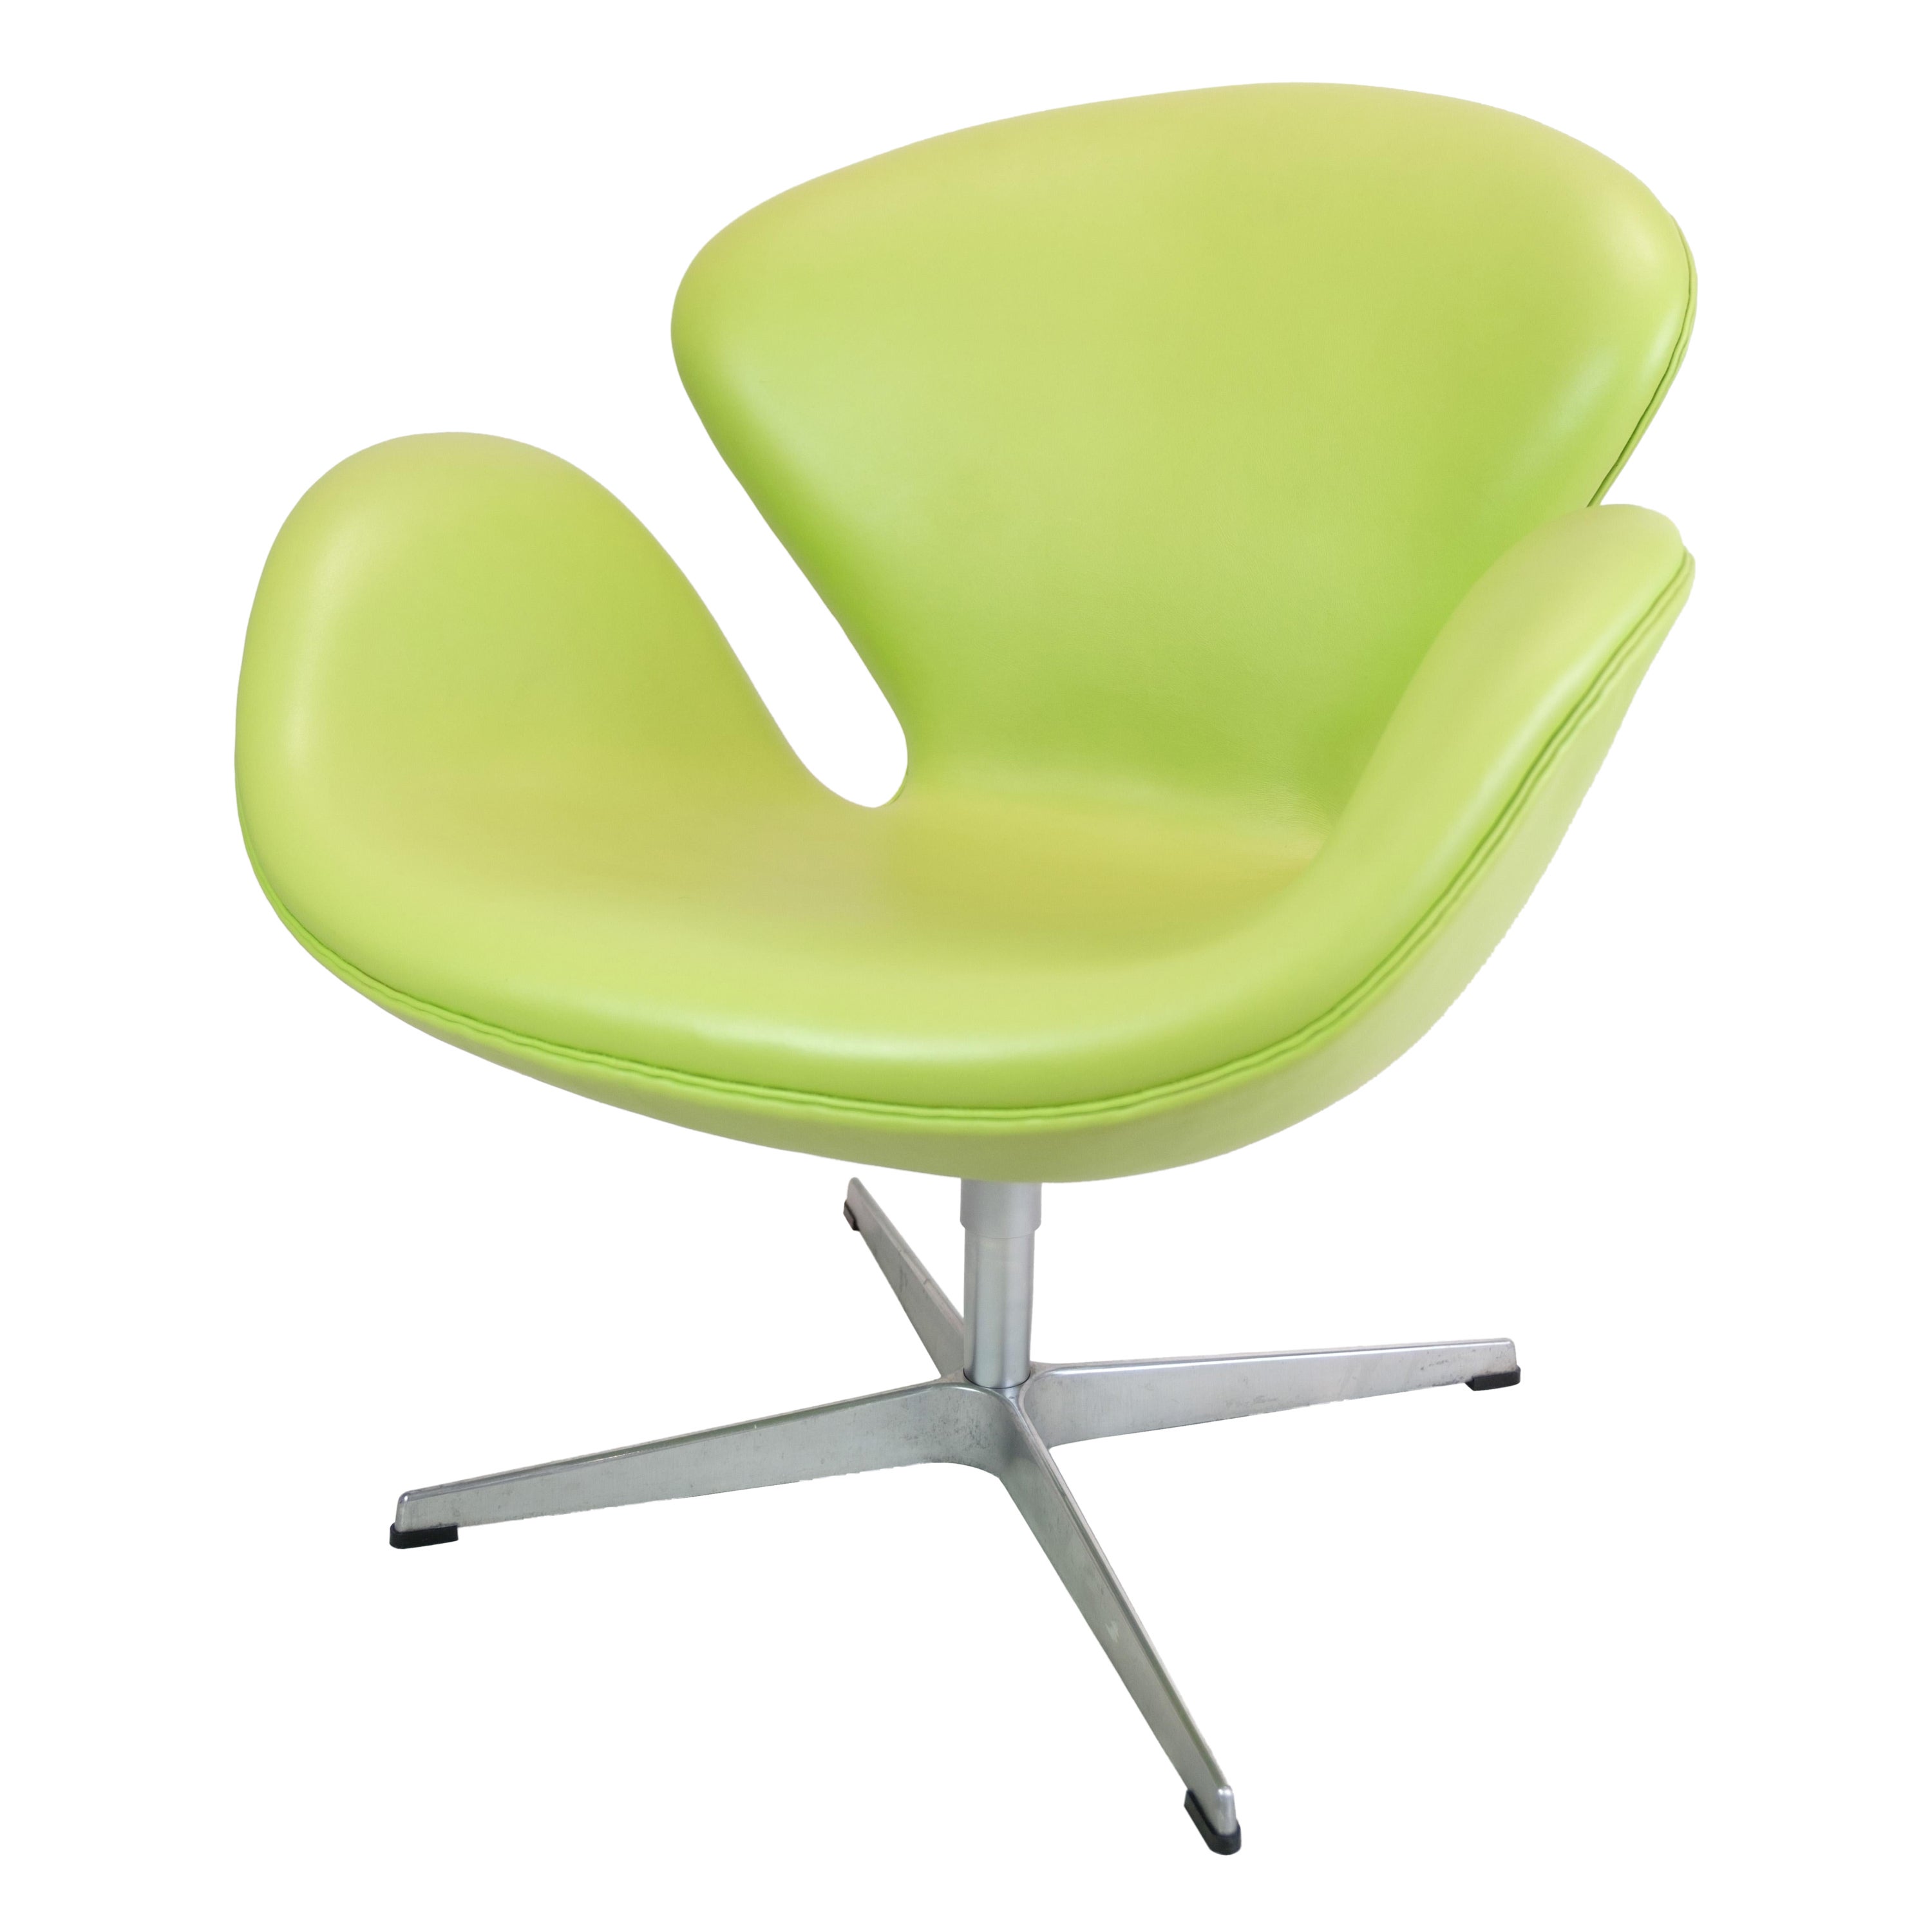 Swan Chair Model 3320 Designed By Arne Jacobsen Made By Fritz Hansen From 2007